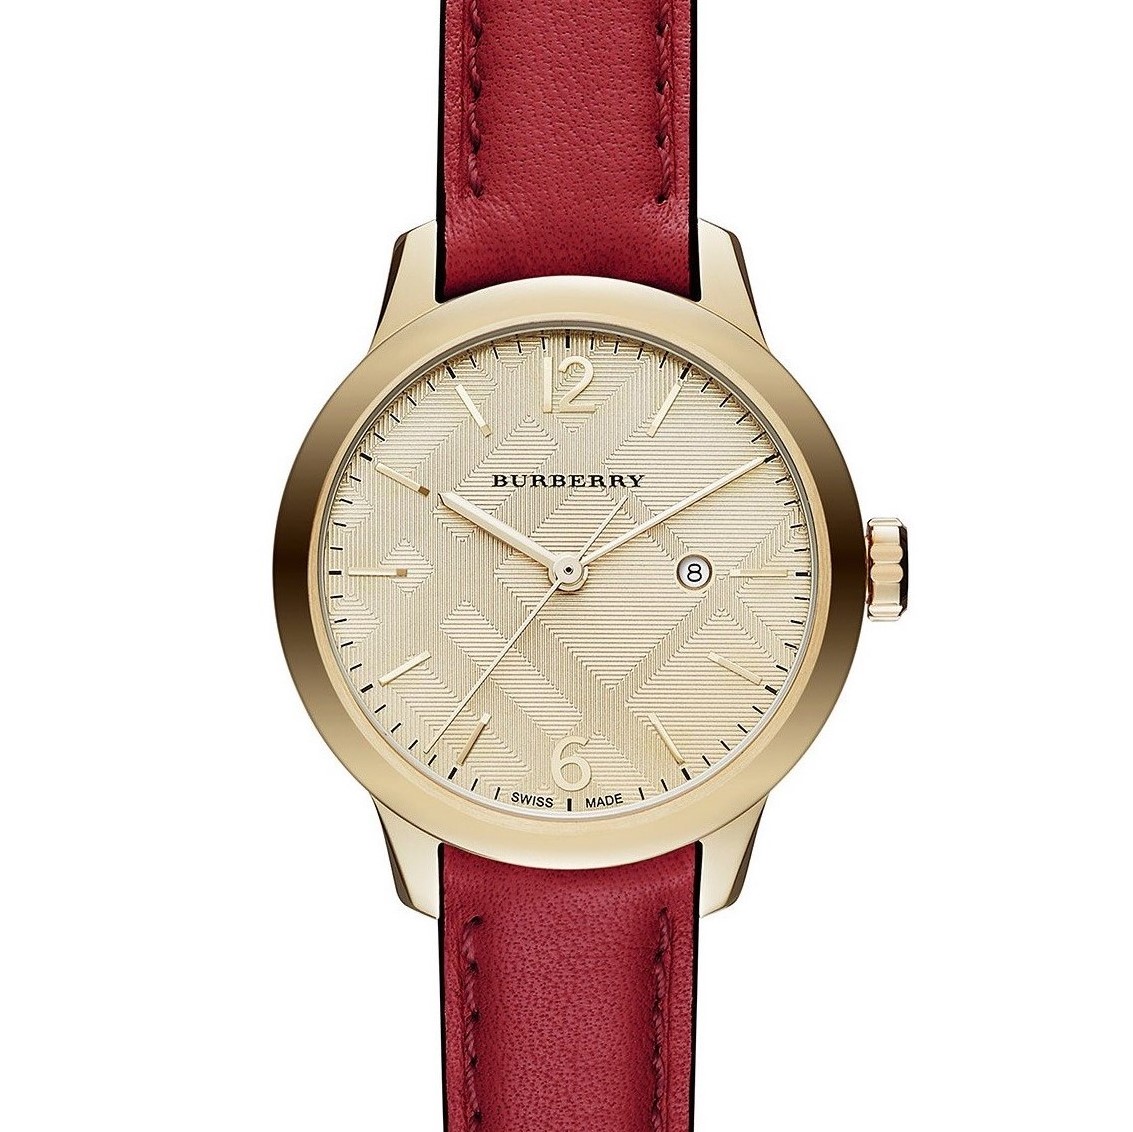 ĐỒNG HỒ NỮ DÂY DA BURBERRY THE CLASSIC ROUND RED LEATHER STRAP LADIES WATCH BU10102 9